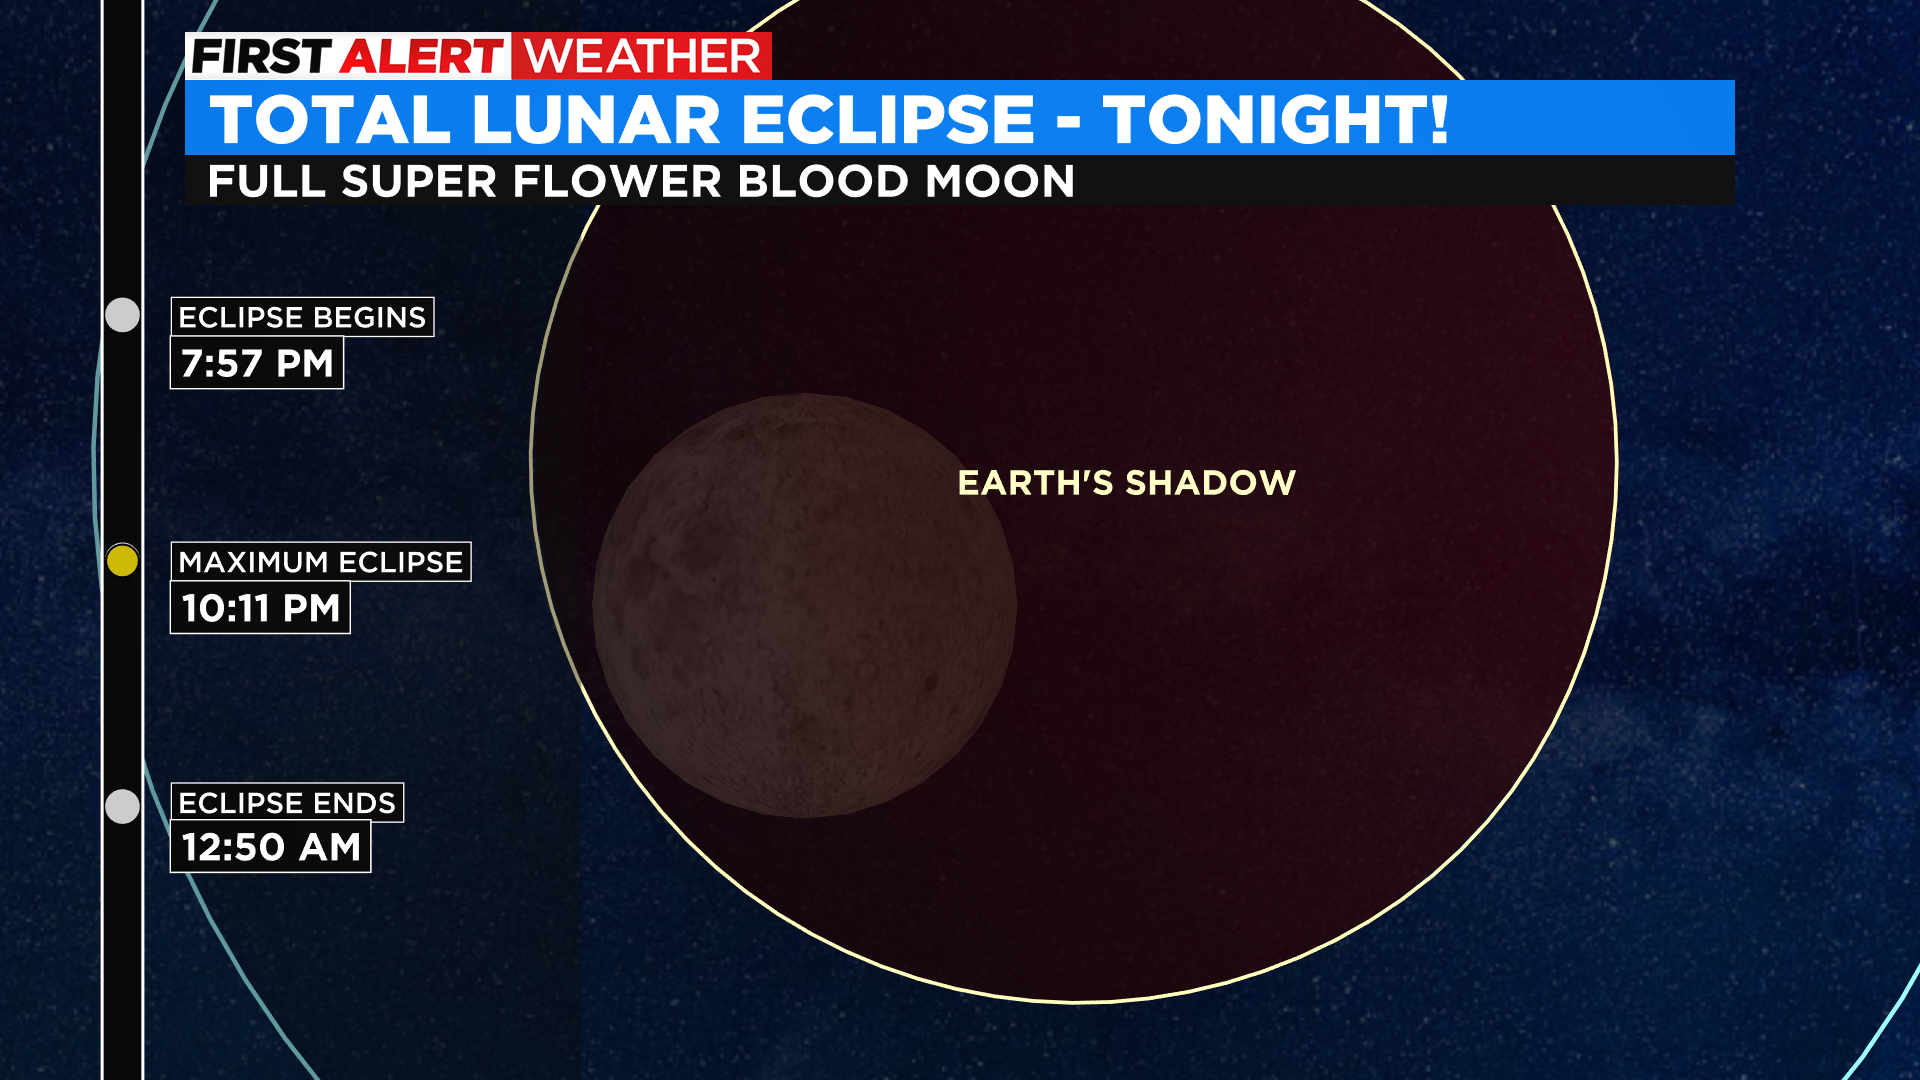 Scattered Clouds Expected For Tonight's Total Eclipse Of Full Super Flower Blood Moon